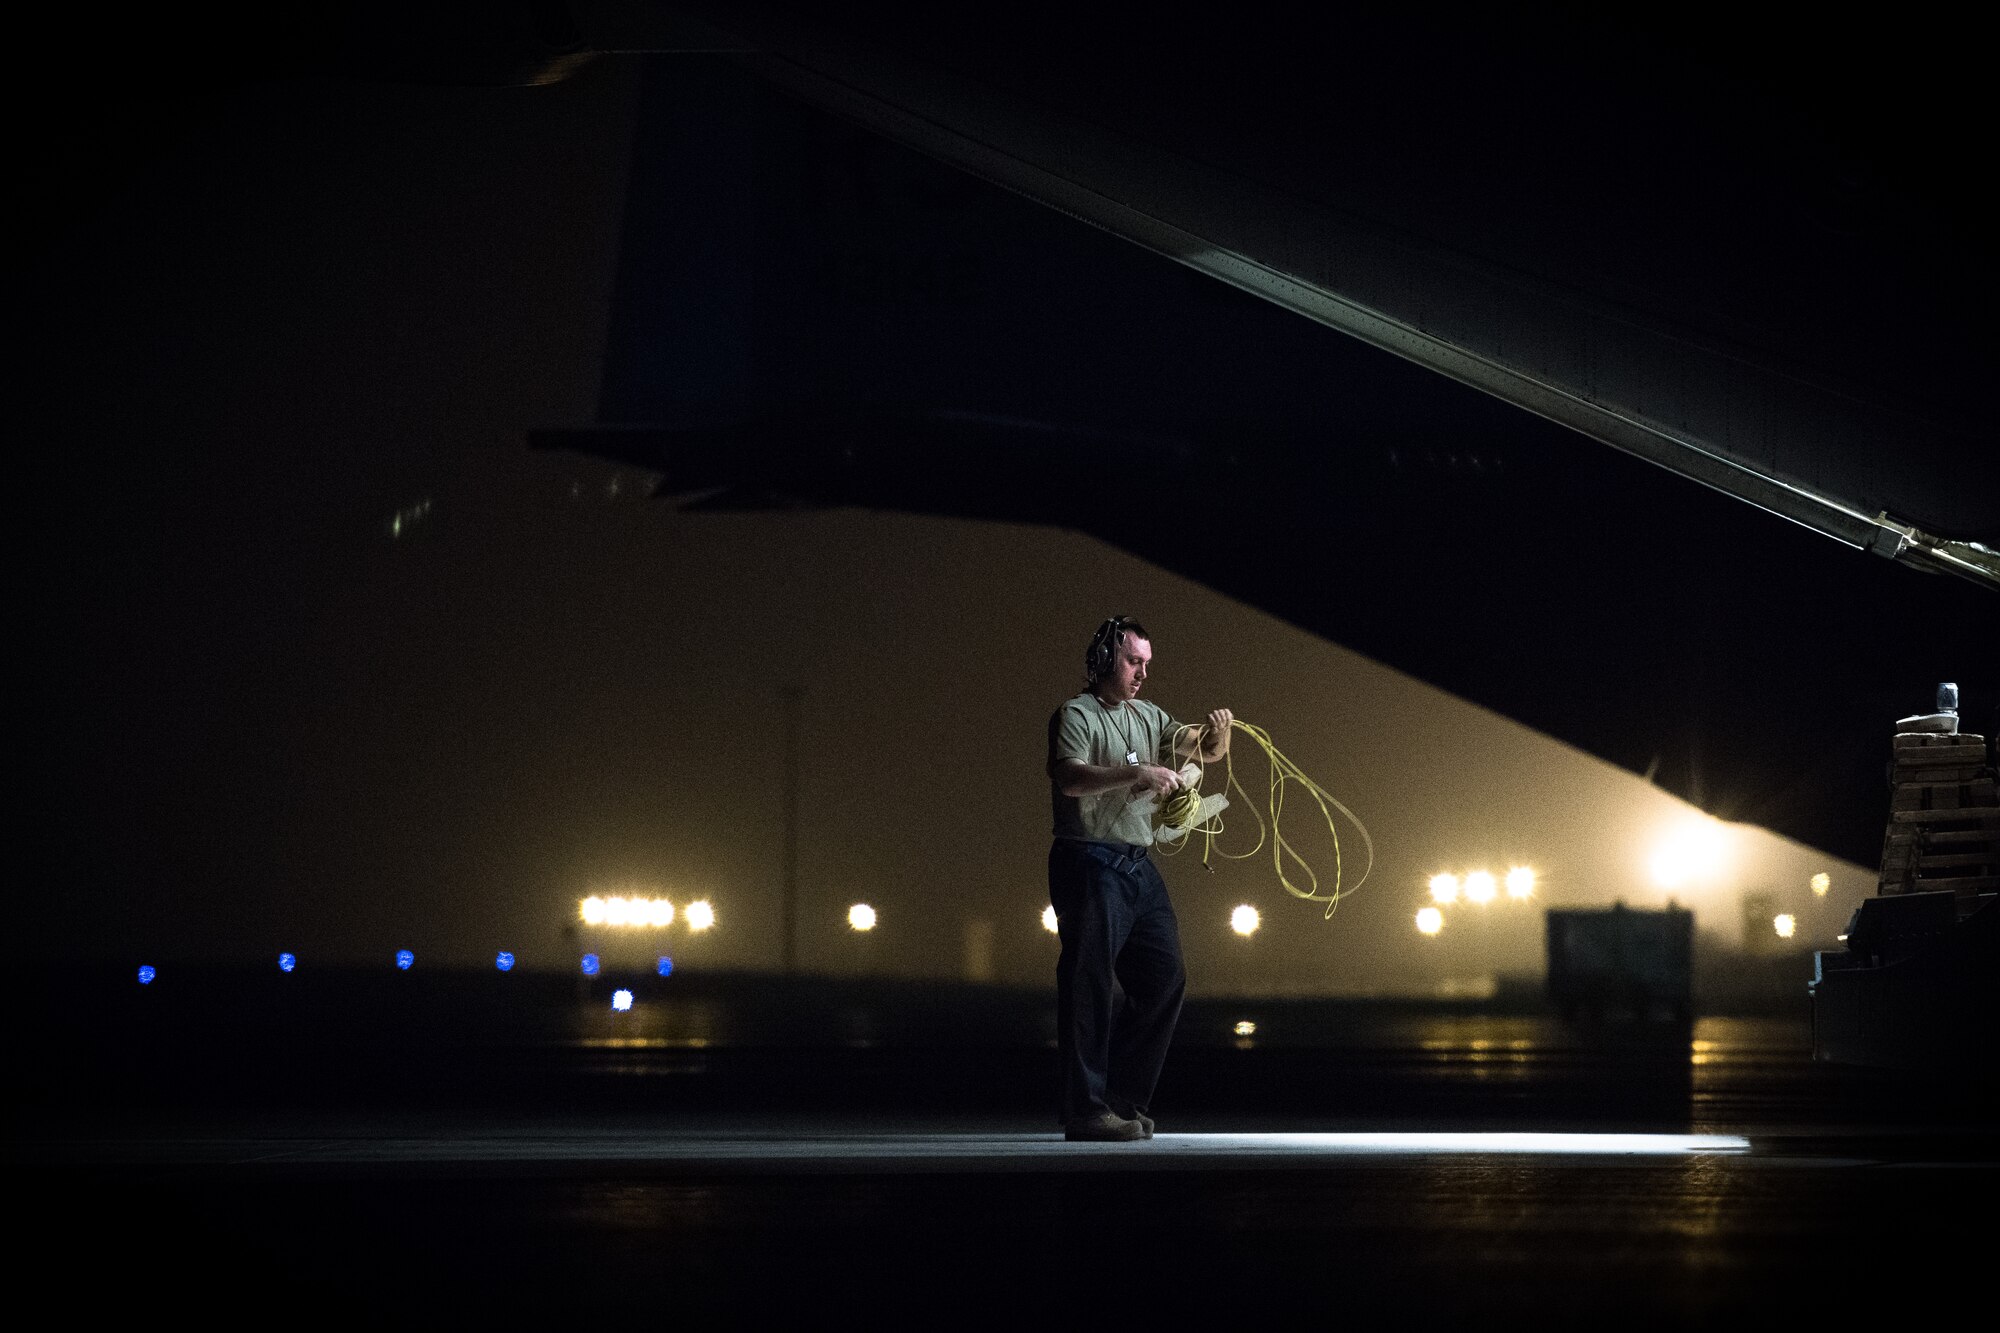 U.S. Air Force Staff Sgt. Darren Breton, 75th Expeditionary Airlift Squadron crew chief, prepares a C-130J Super Hercules for flight at Camp Lemonnier, Djibouti, June 5, 2019. The 75th EAS provides support in medical evacuations, disaster relief, humanitarian and airdrop operations. (U.S. Air Force photo by Staff Sgt. Devin Boyer)